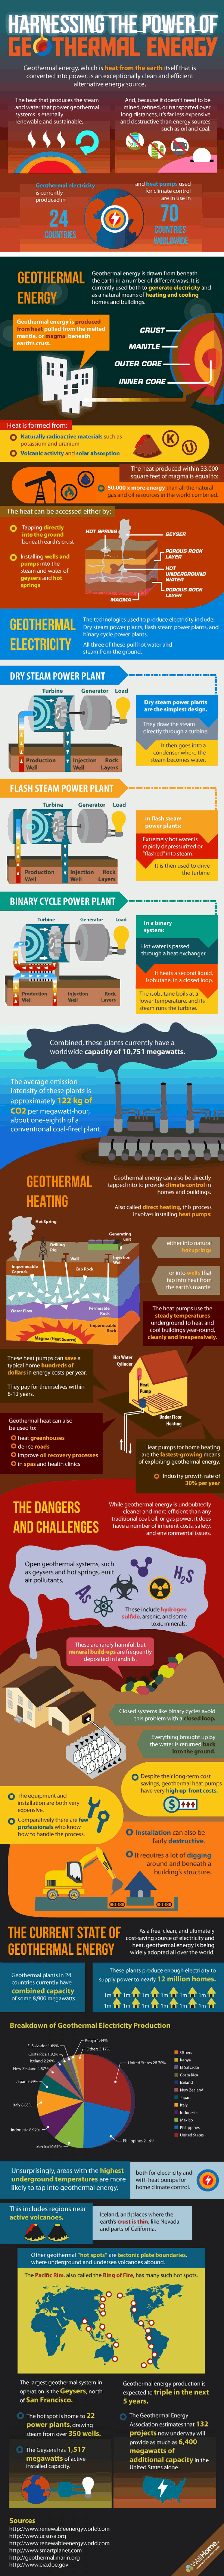 Harnessing The Power Of Geothermal Energy